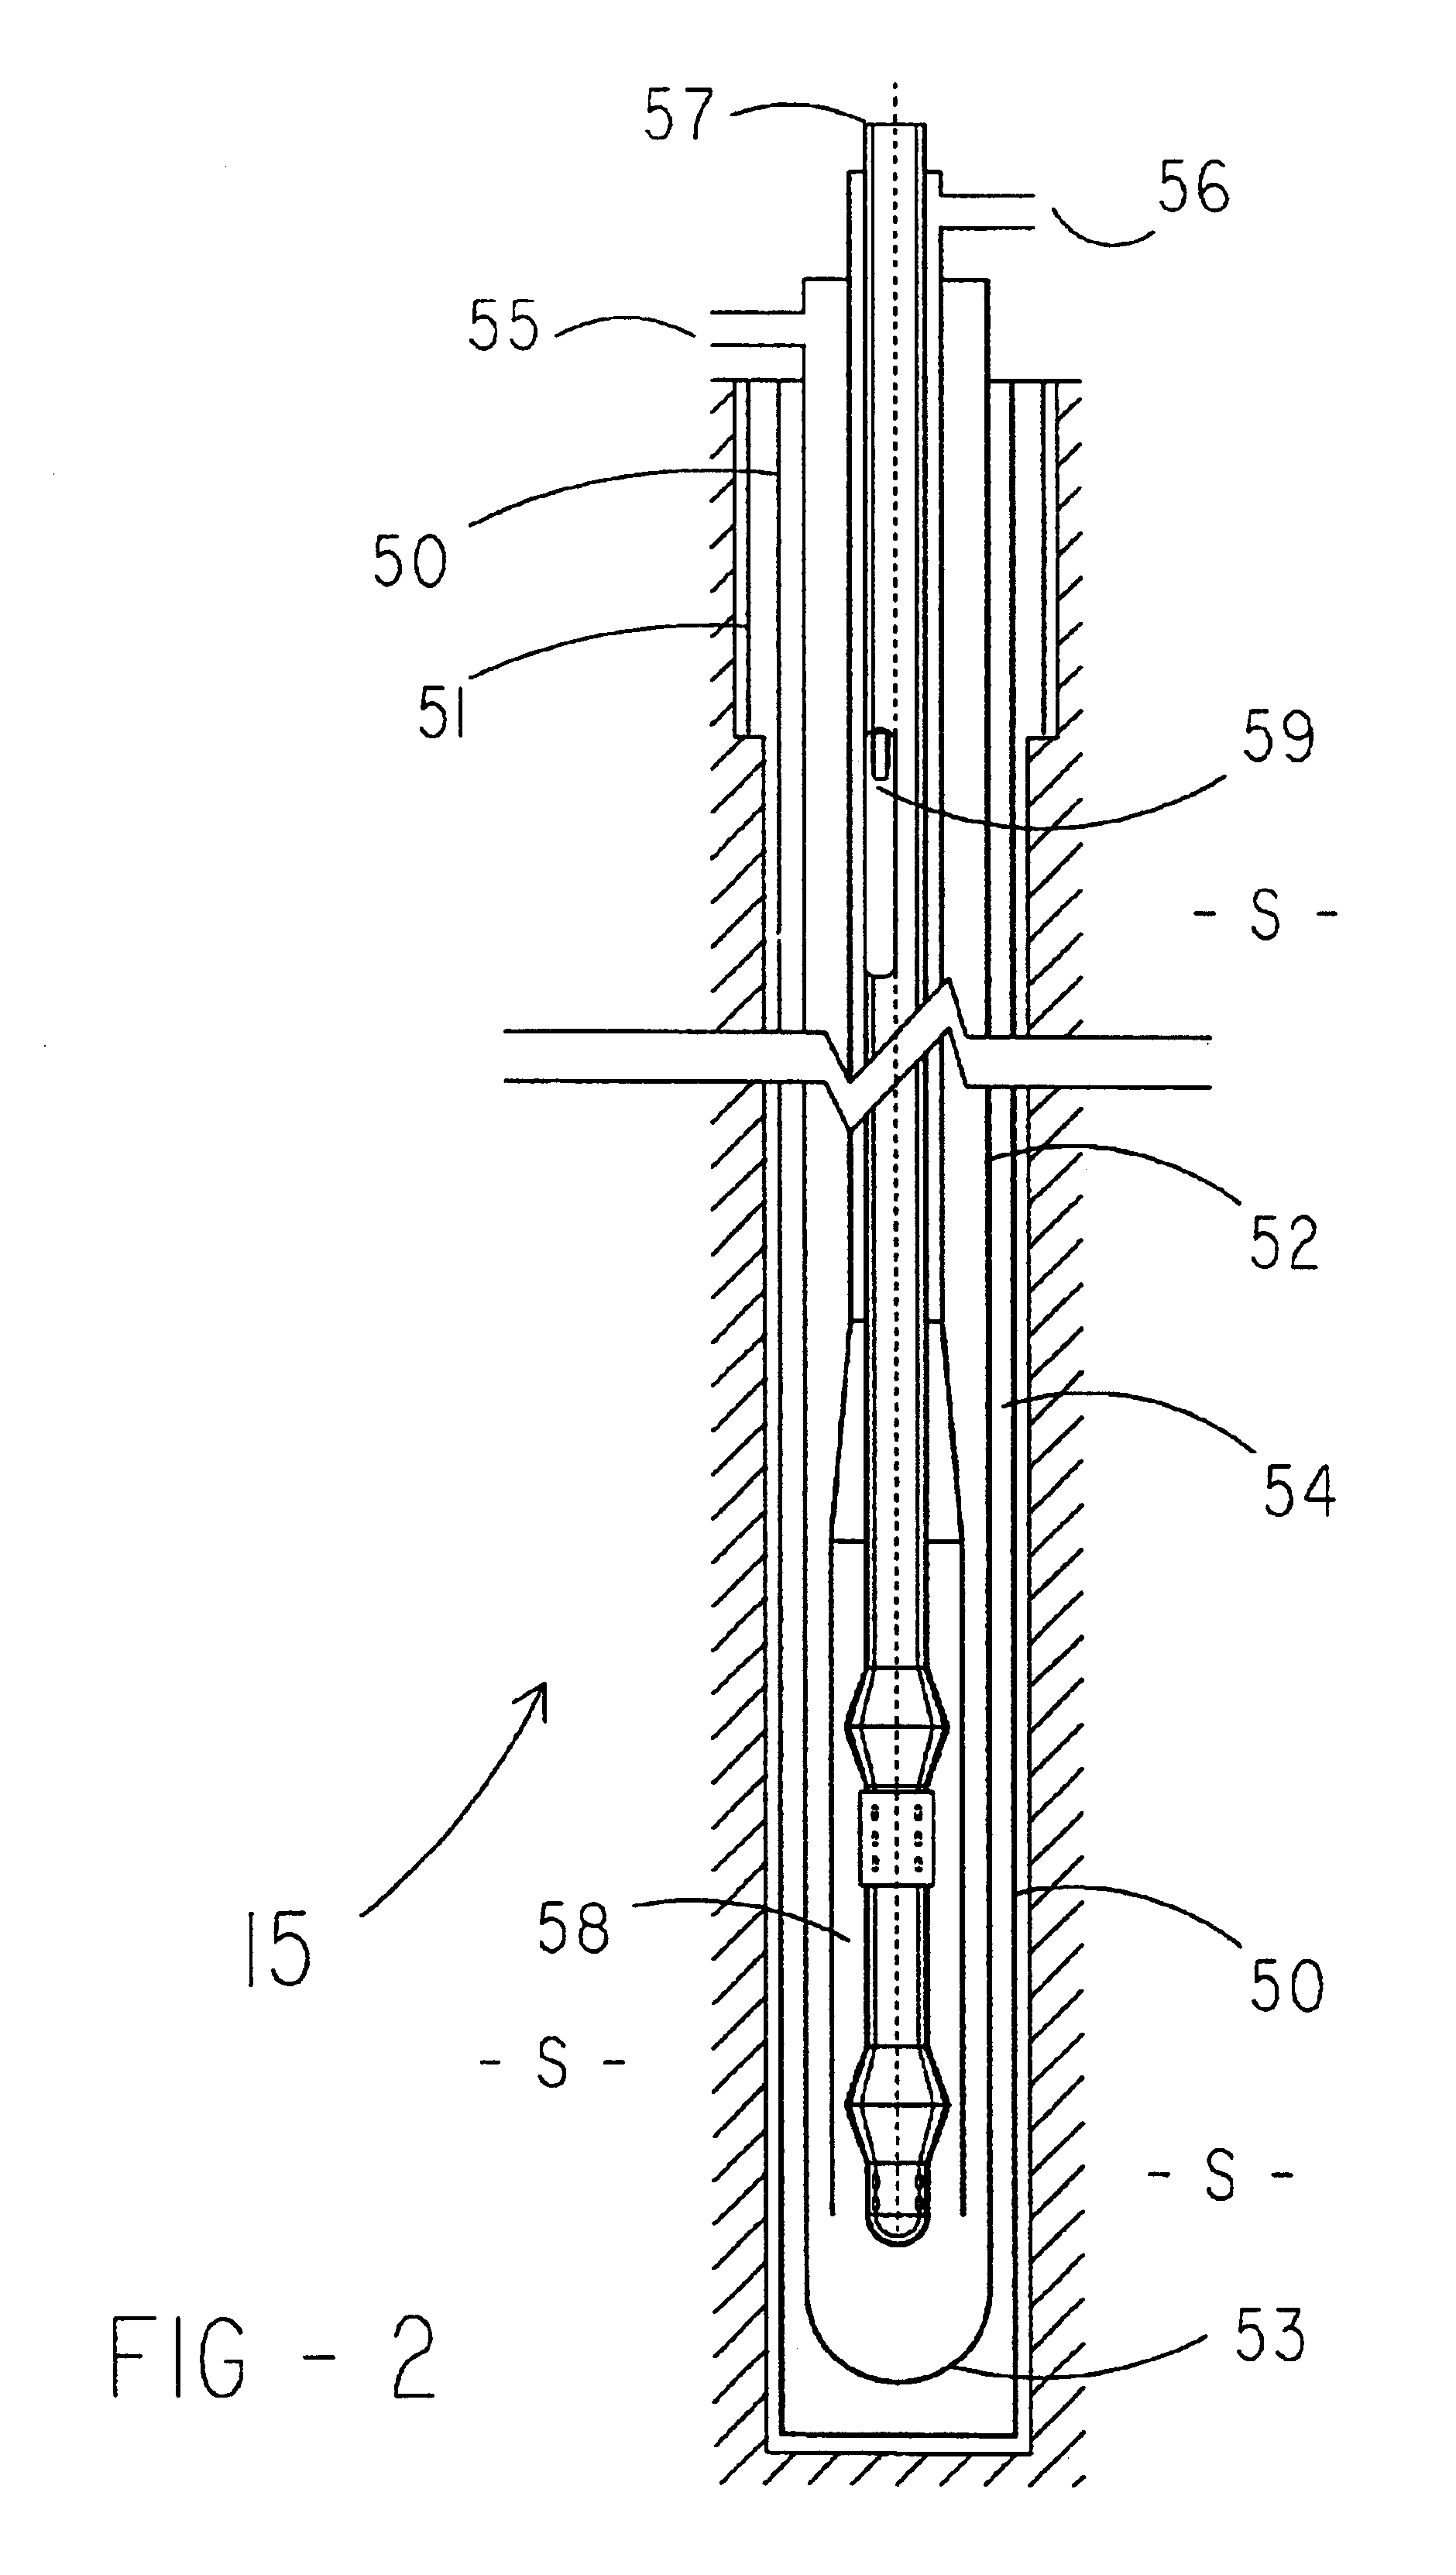 Method and apparatus for treating waste streams